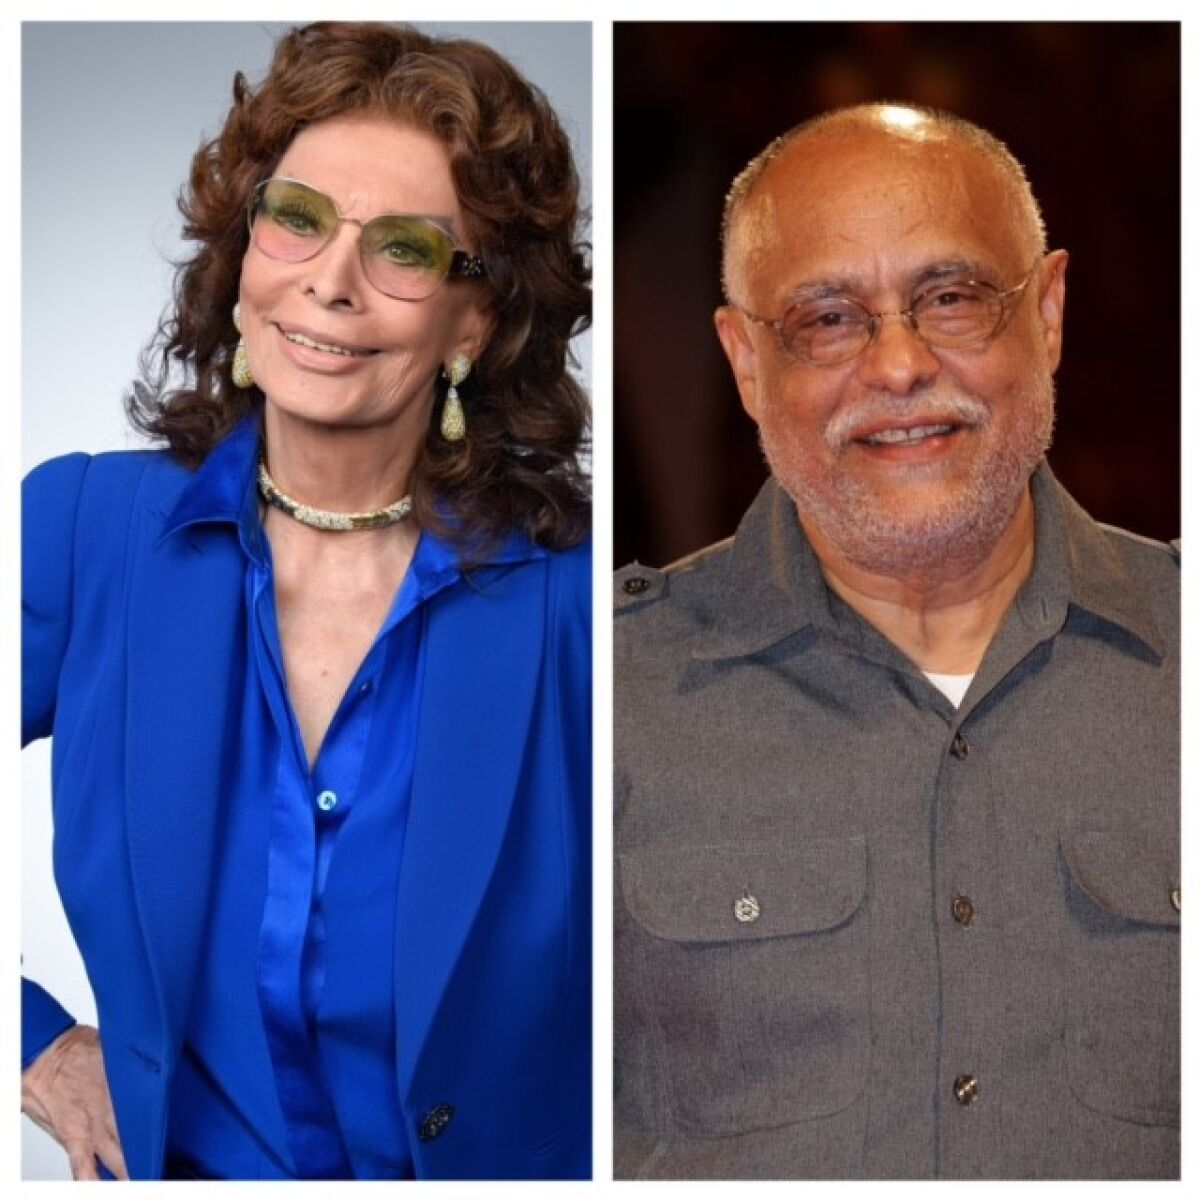 A collage of portraits showing Sophia Loren and Haile Gerima.